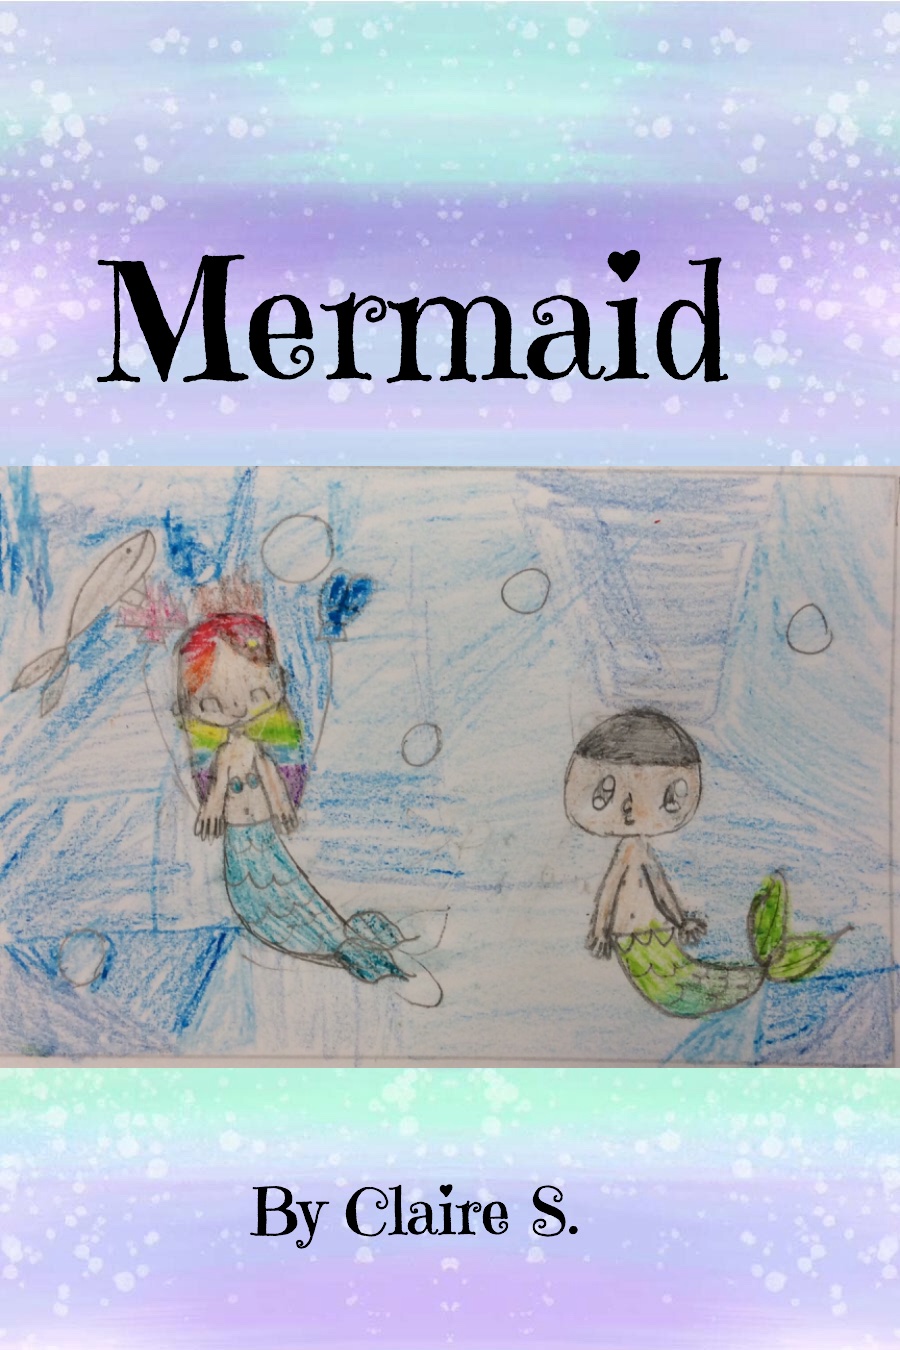 Mermaid by Claire S